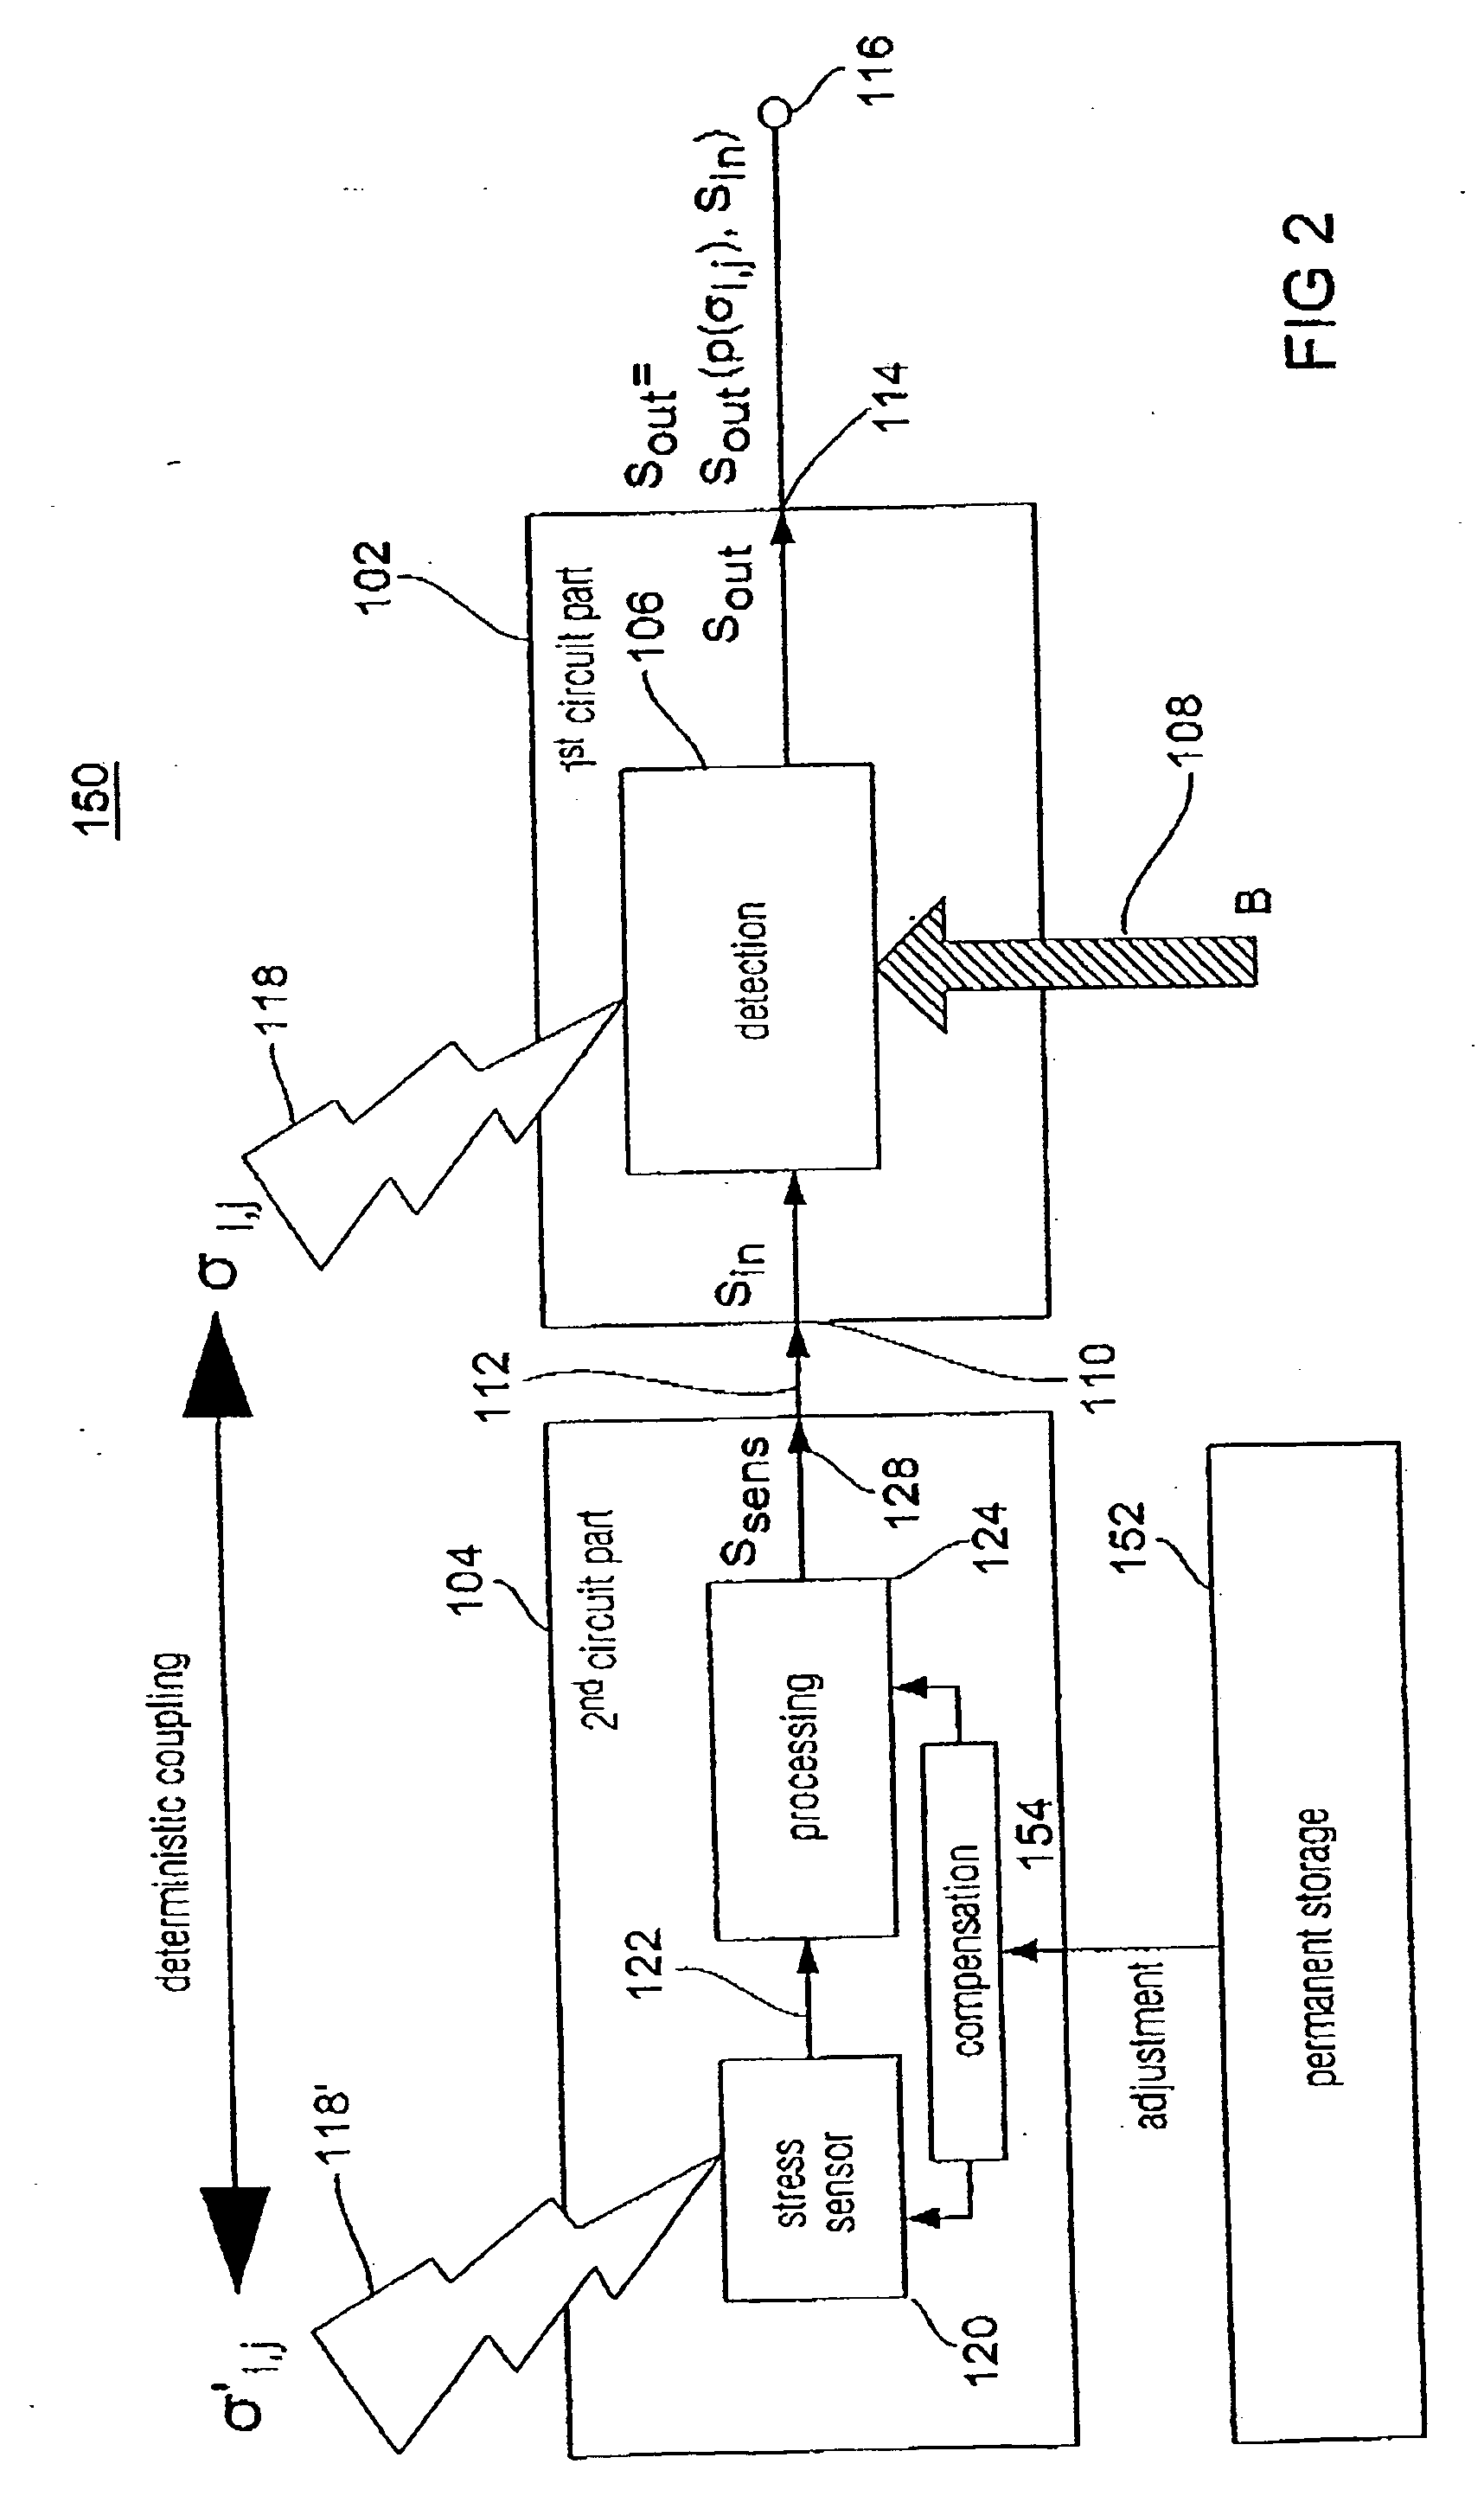 Concept for compensating the influences of external disturbing quantities on physical functional parameters of integrated circuits